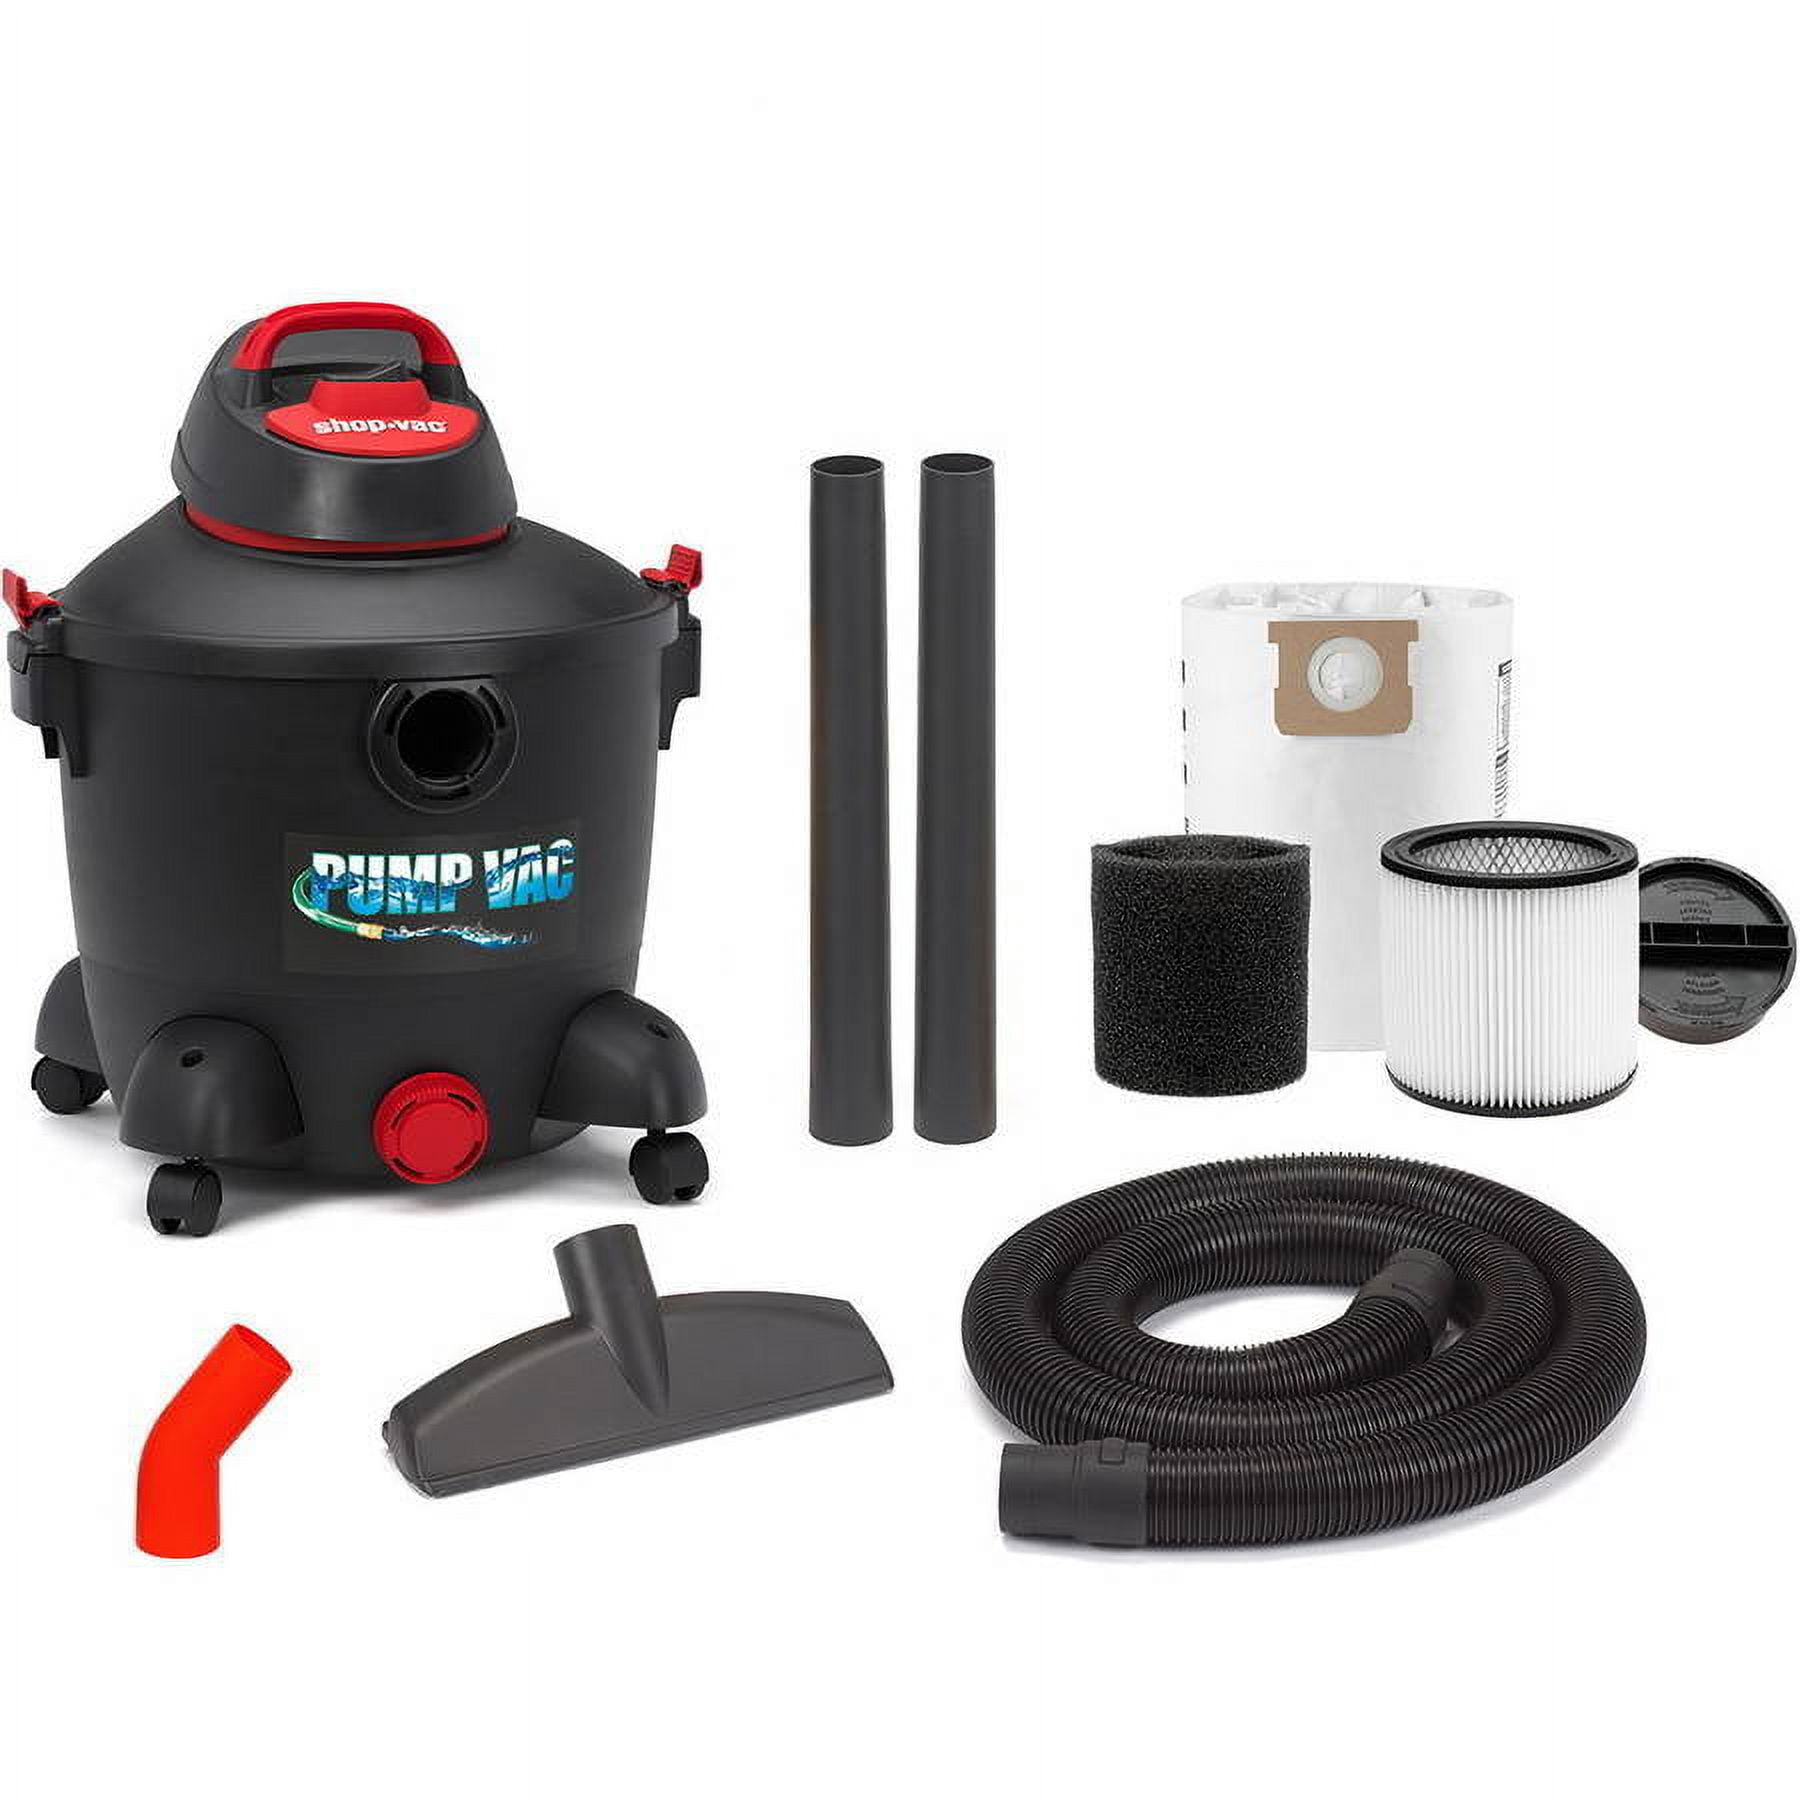 Shop-Vac, 10 Gallon 5.0 Peak HP Wet/Dry Vac with Pump Out Feature